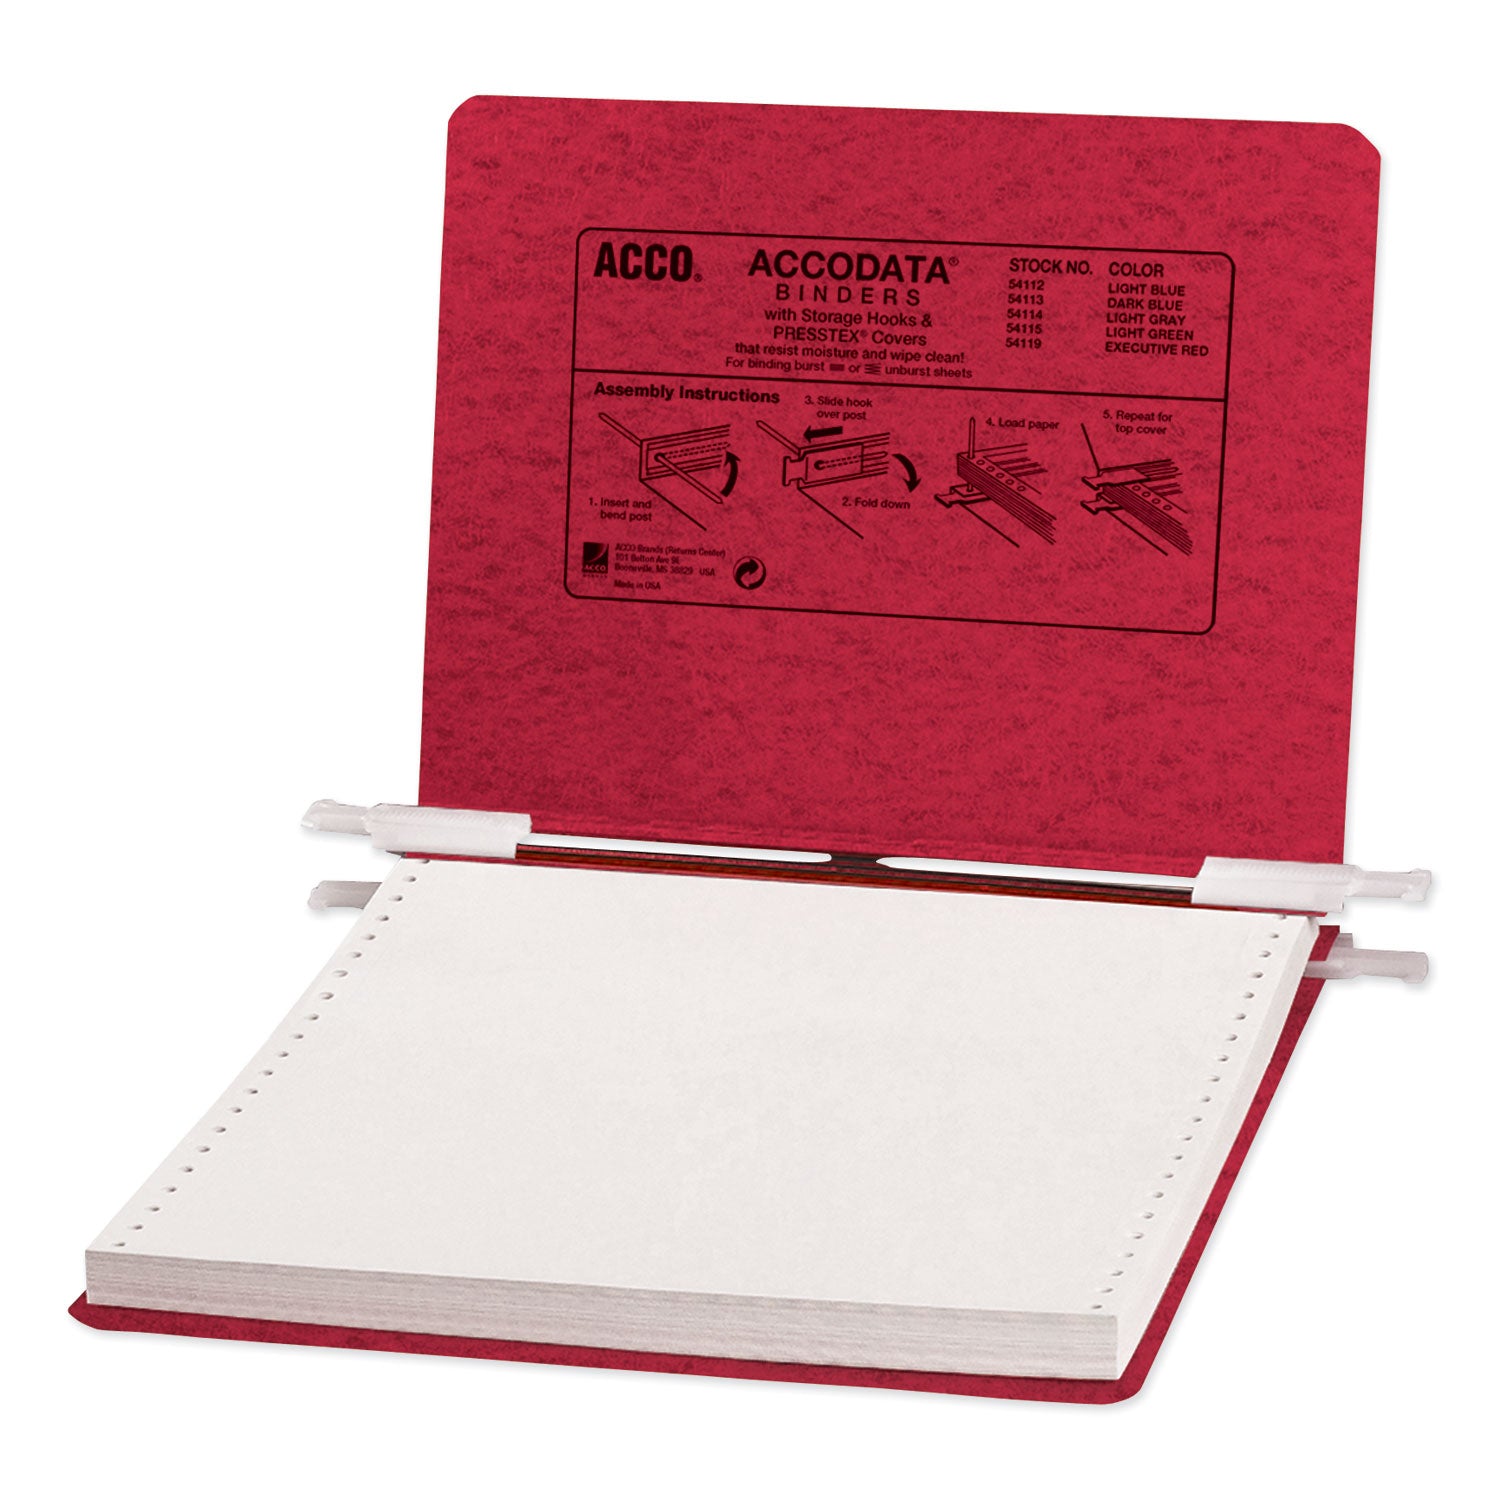 PRESSTEX Covers with Storage Hooks, 2 Posts, 6" Capacity, 9.5 x 11, Executive Red - 